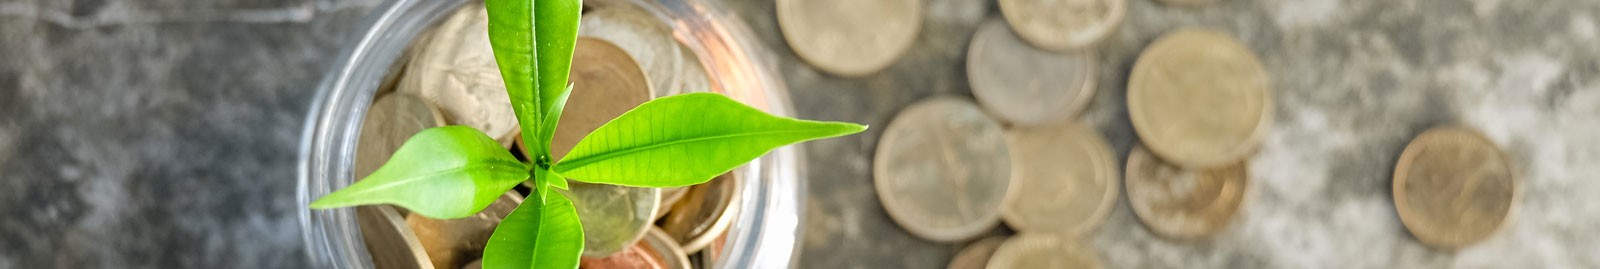 A small, green plant grows out of a jar of coins. Other coins lay on the table below.